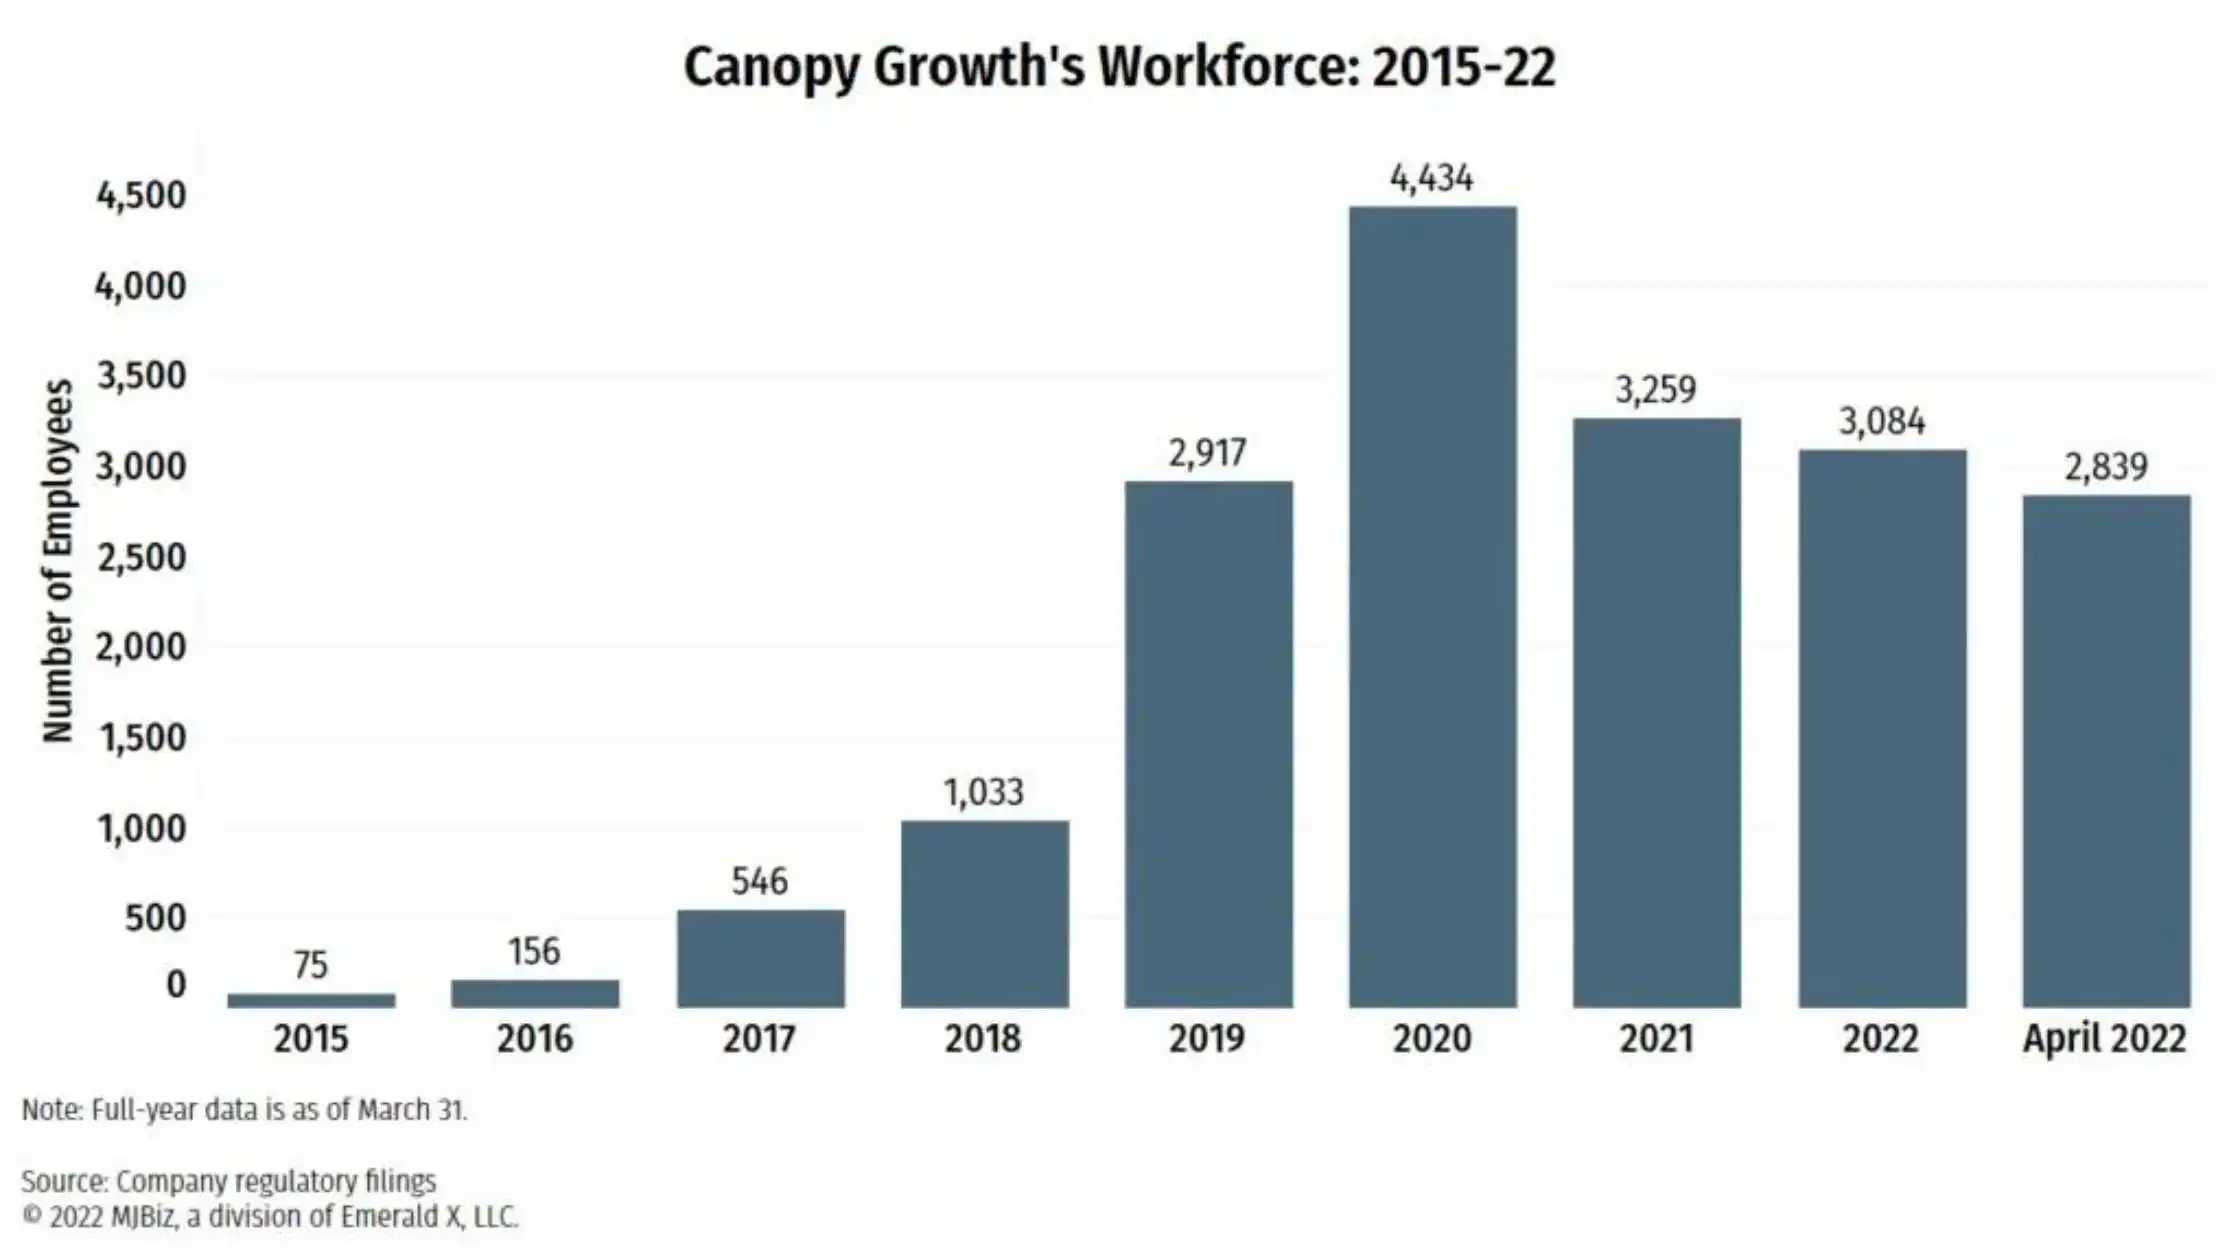 Cannabis Cultivator’s Canopy Growth Sheds 8% of Workforce, Eyes CA$150 Million in Savings